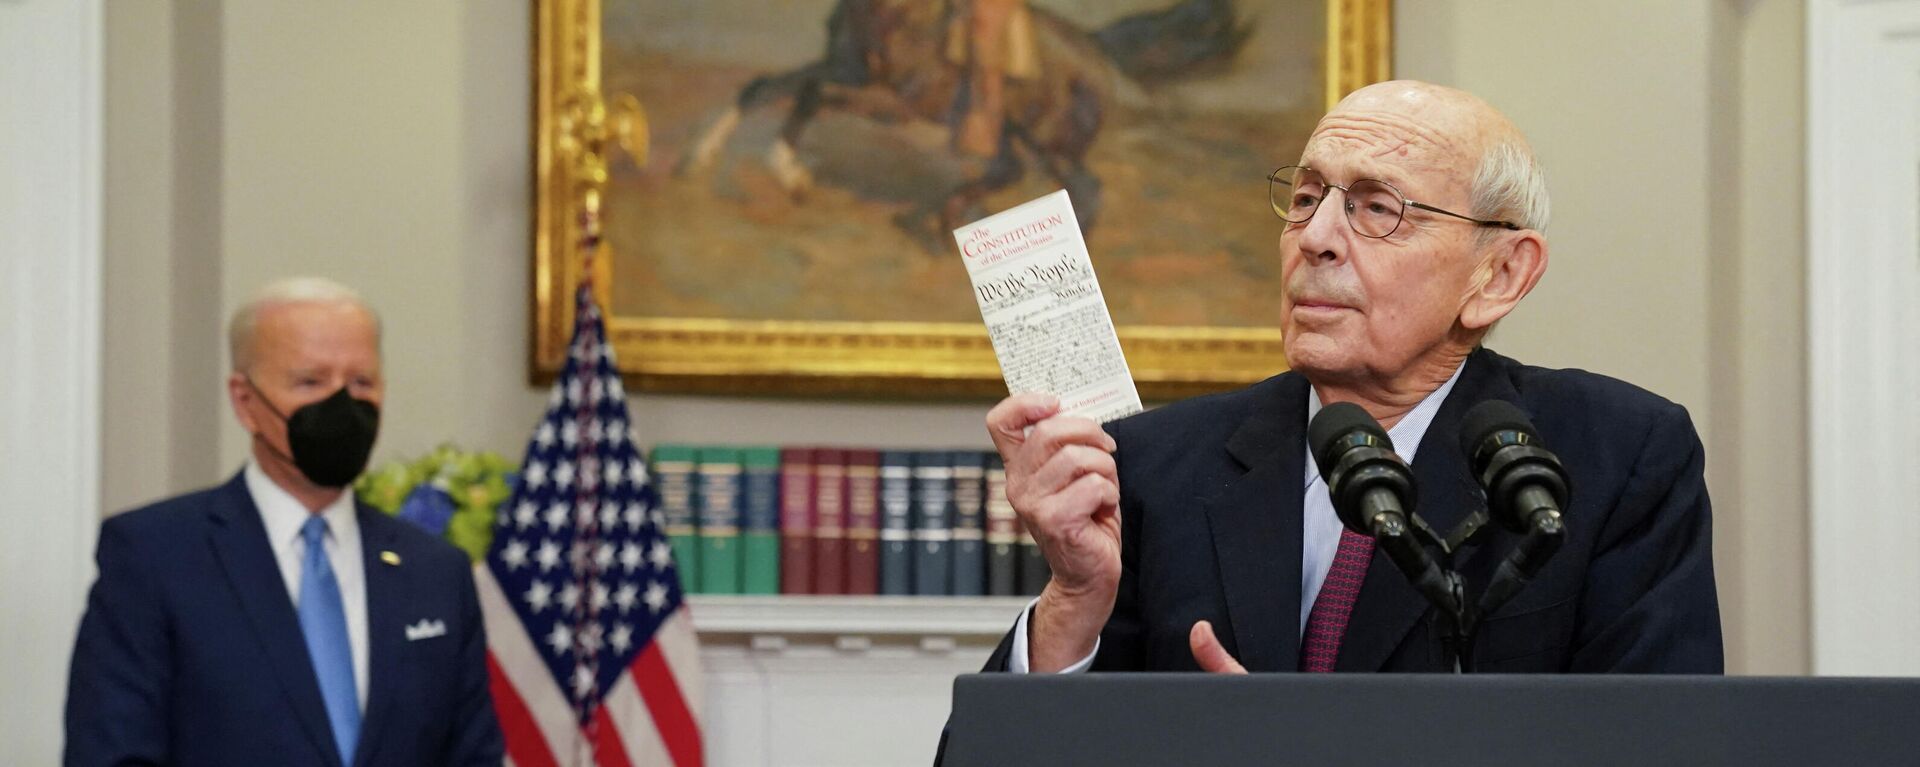 U.S. Supreme Court Justice Stephen Breyer holds up a copy of the U.S. Constitution, while President Joe Biden looks on, as Breyer announces he will retire at the end of the court's current term, at the White House in Washington, U.S. - Sputnik International, 1920, 27.01.2022